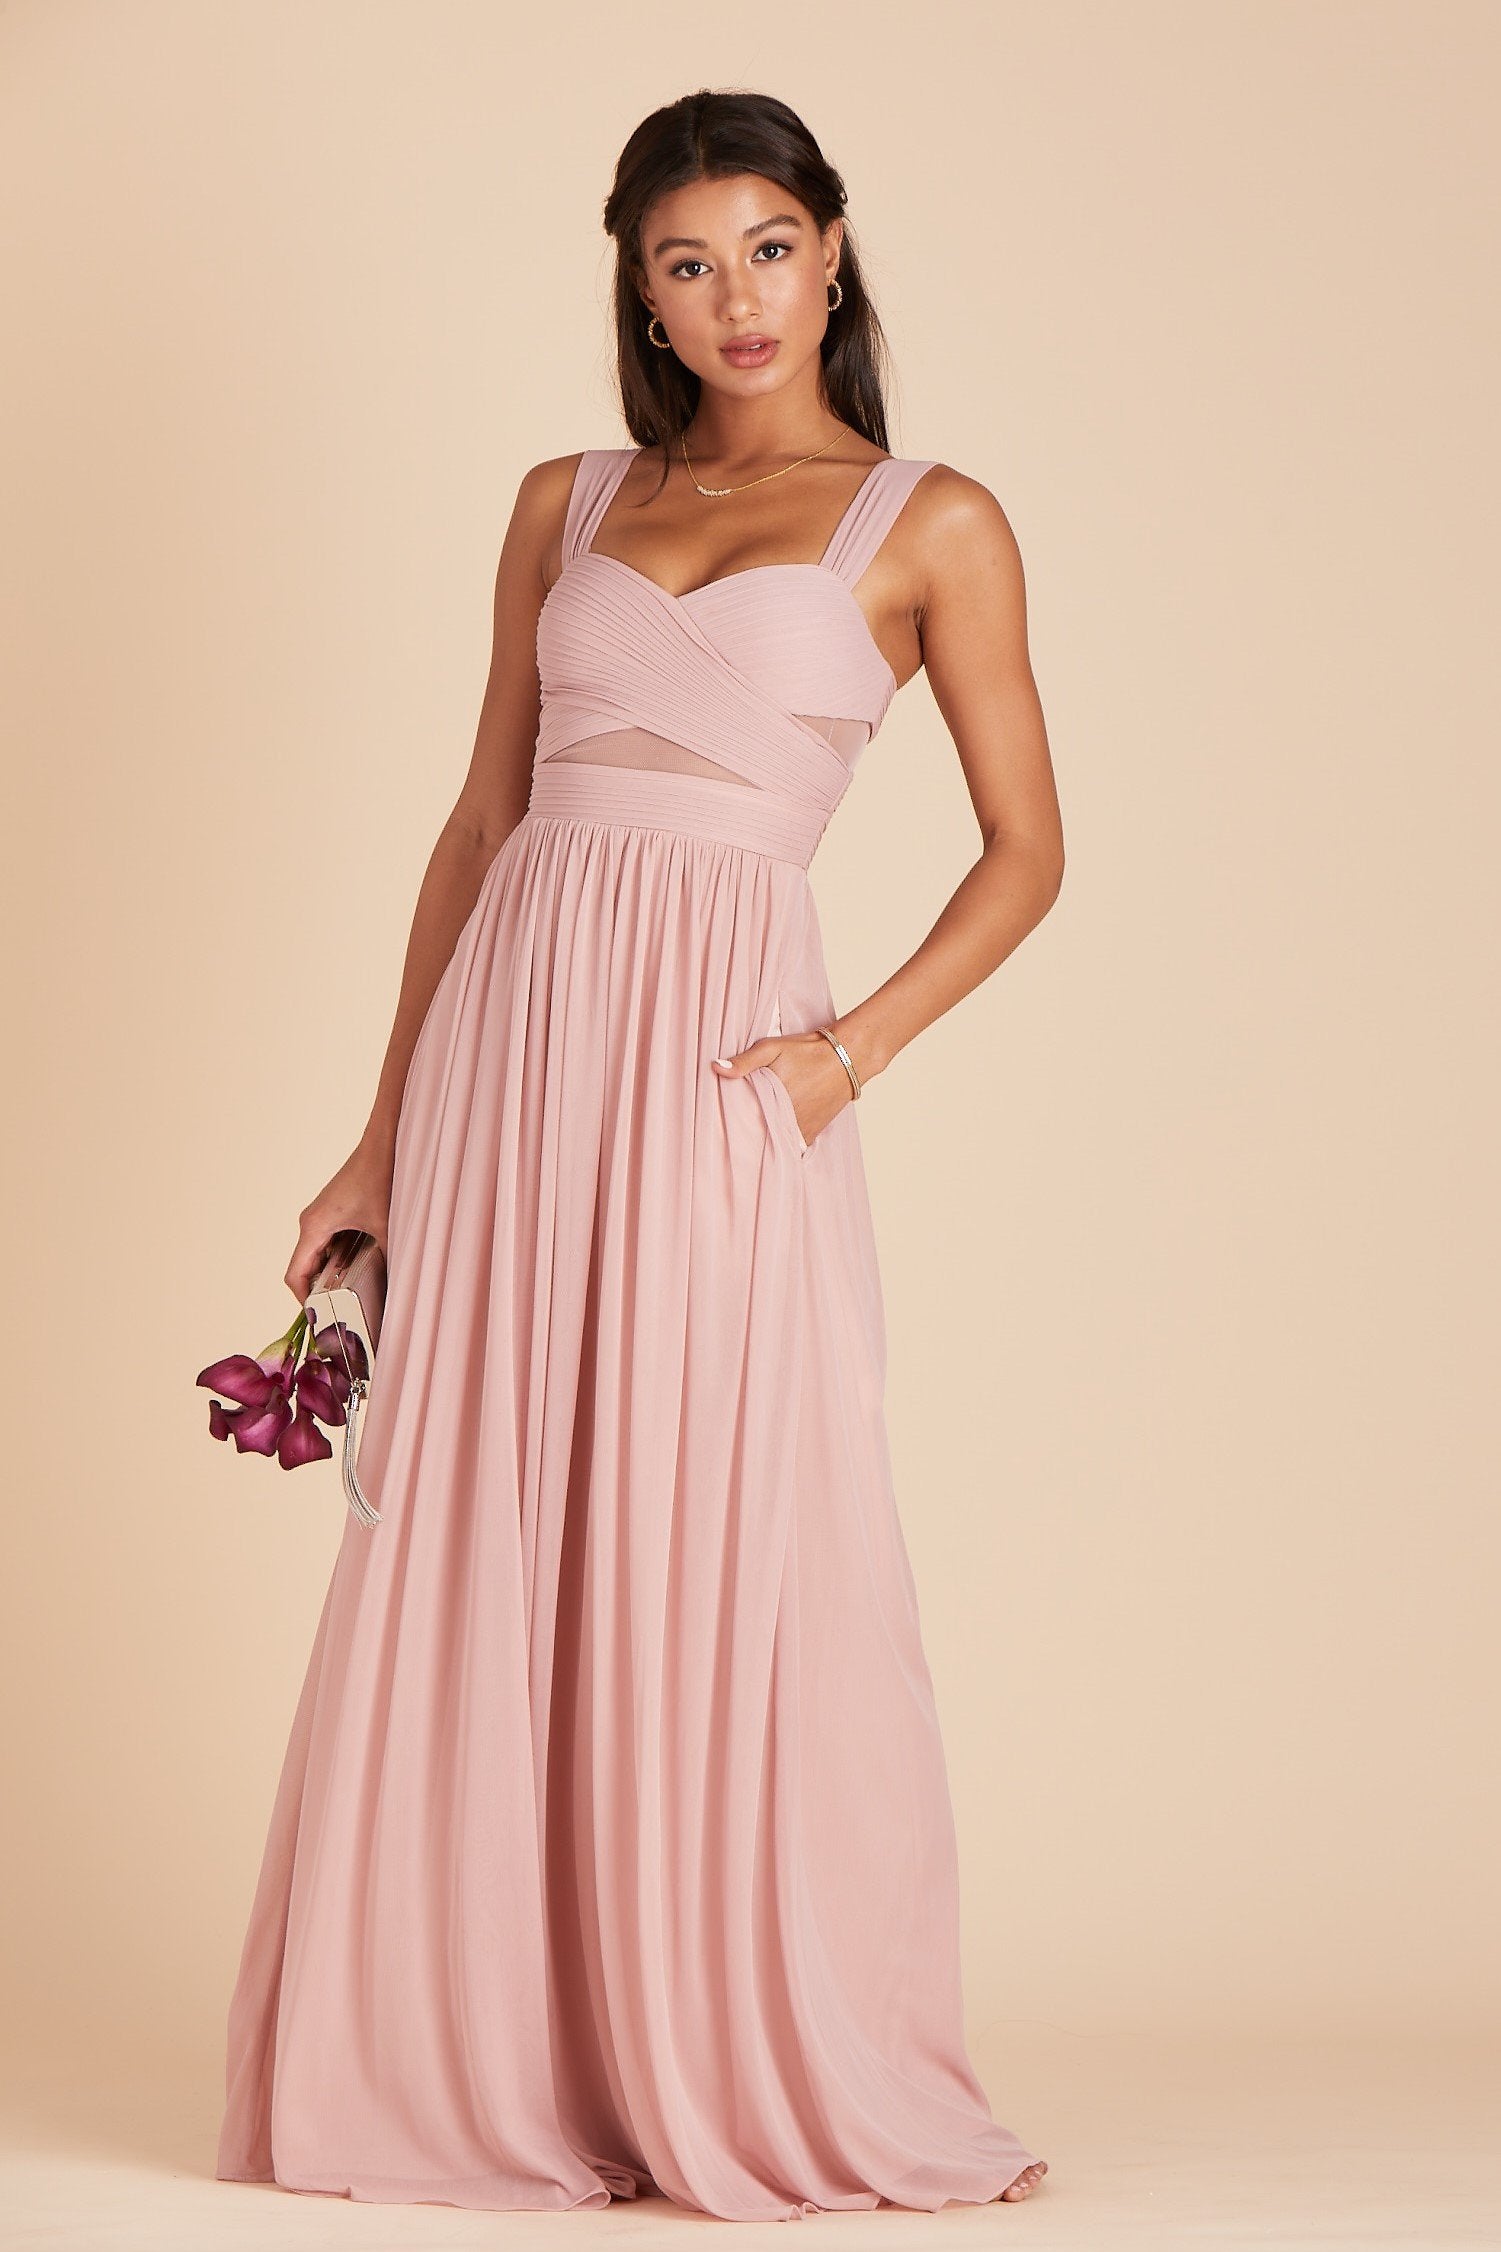 Front view of the Elsye Bridesmaid Dress in dusty rose as the model rests her left hand in the hidden side pocket.